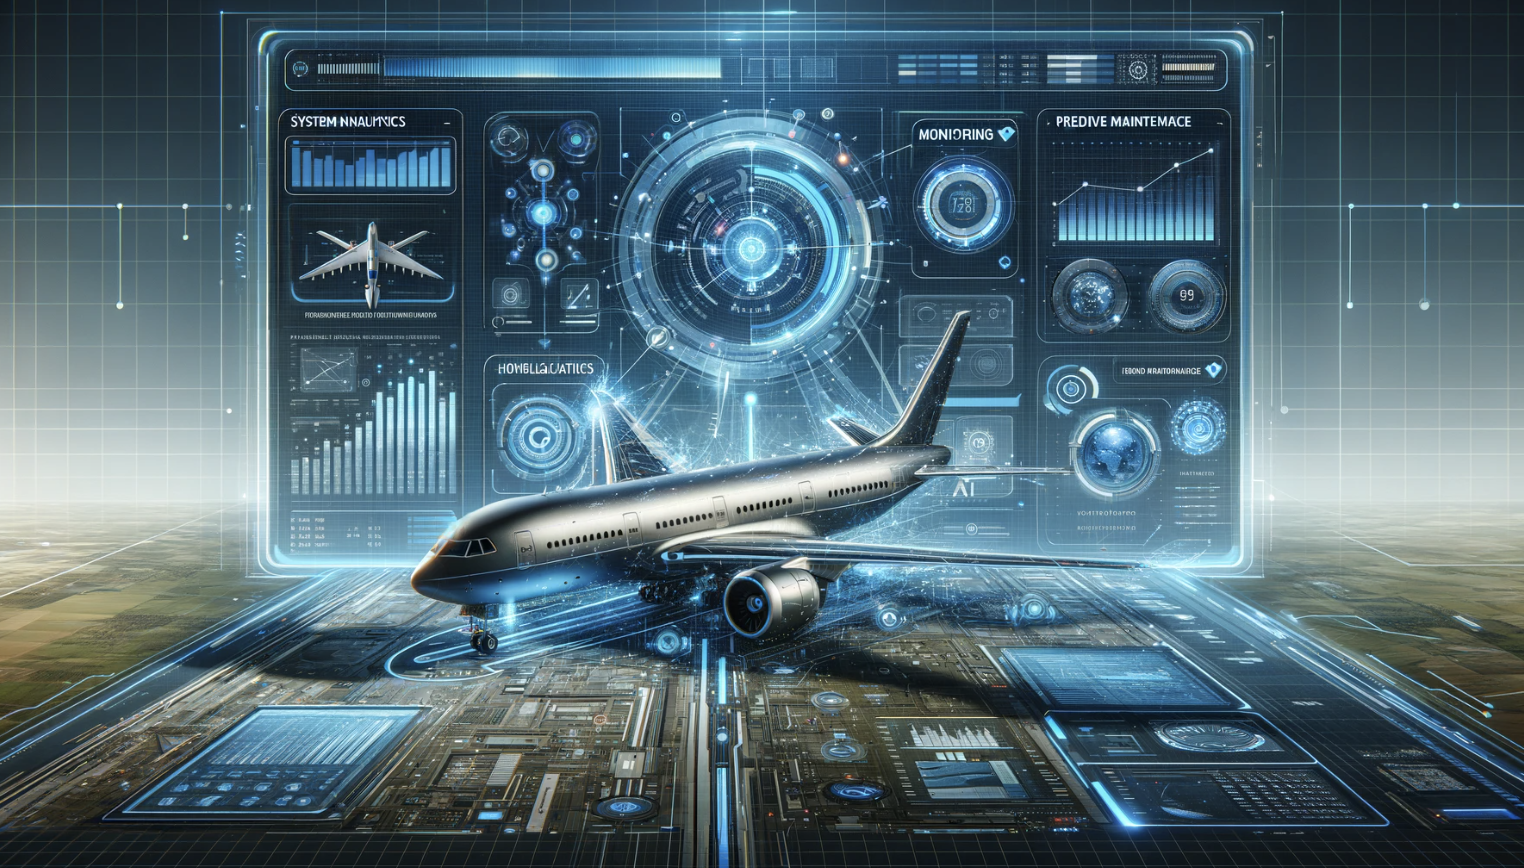 Intelligent Health and Mission Management (IHMM): The next evolution of ISHM in Aviation 